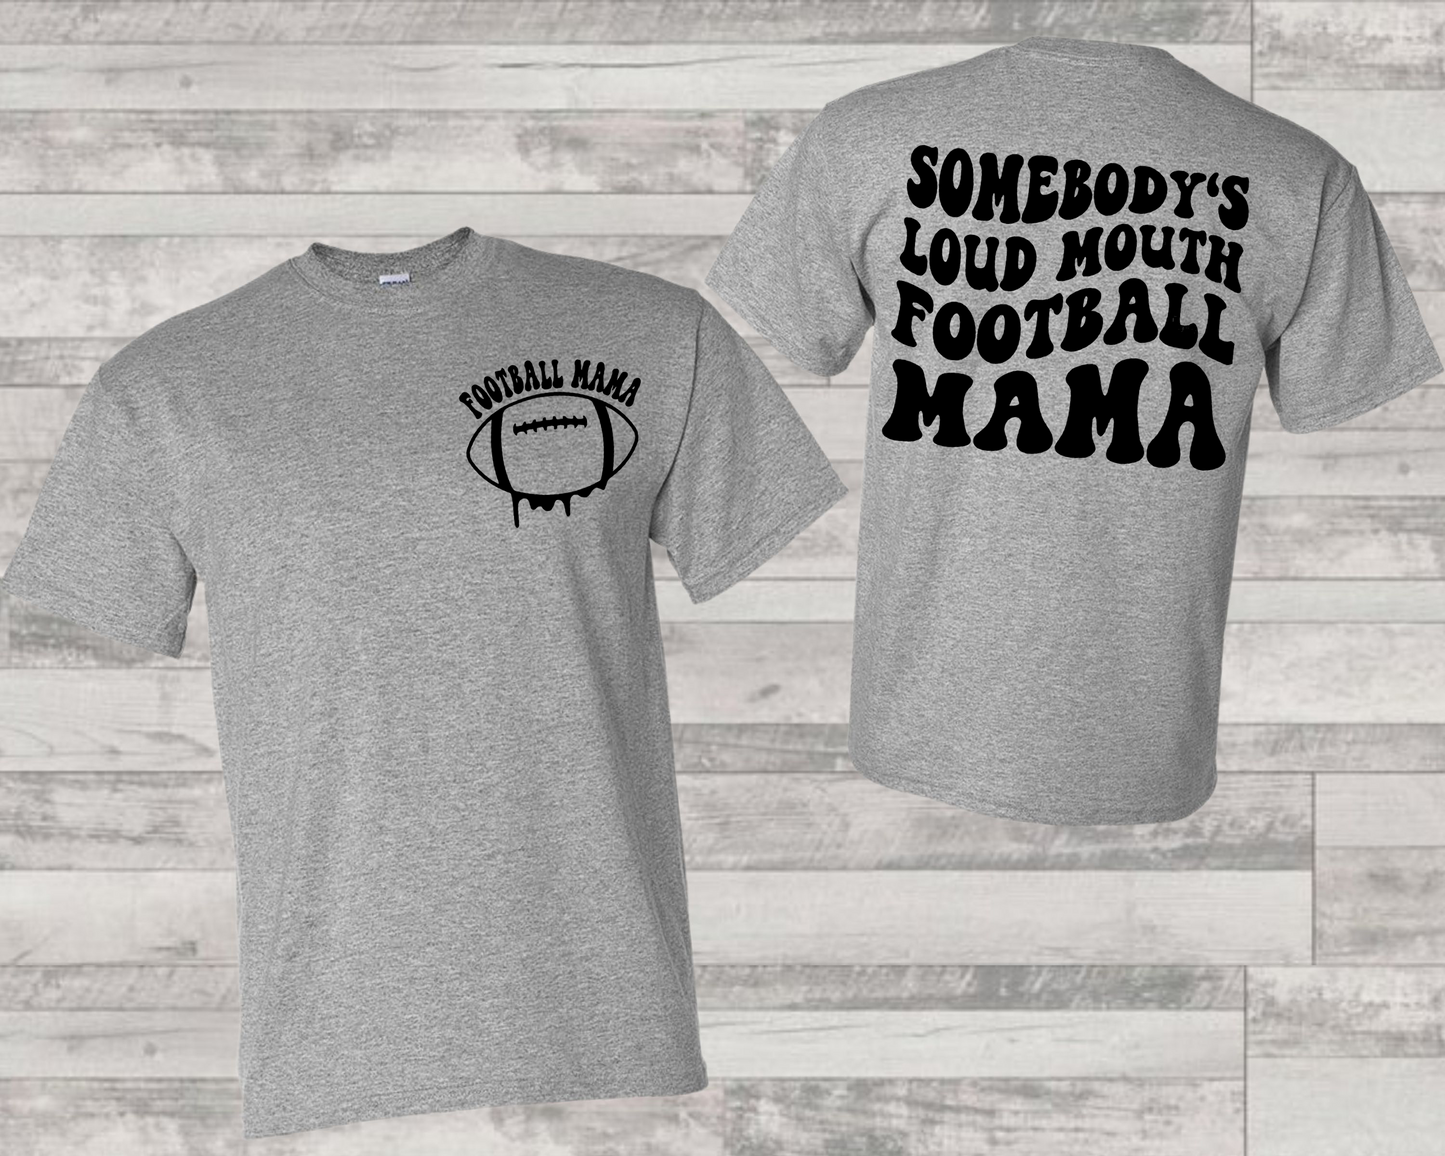 Somebodies loud mouth Football mama (FRONT)- DTF